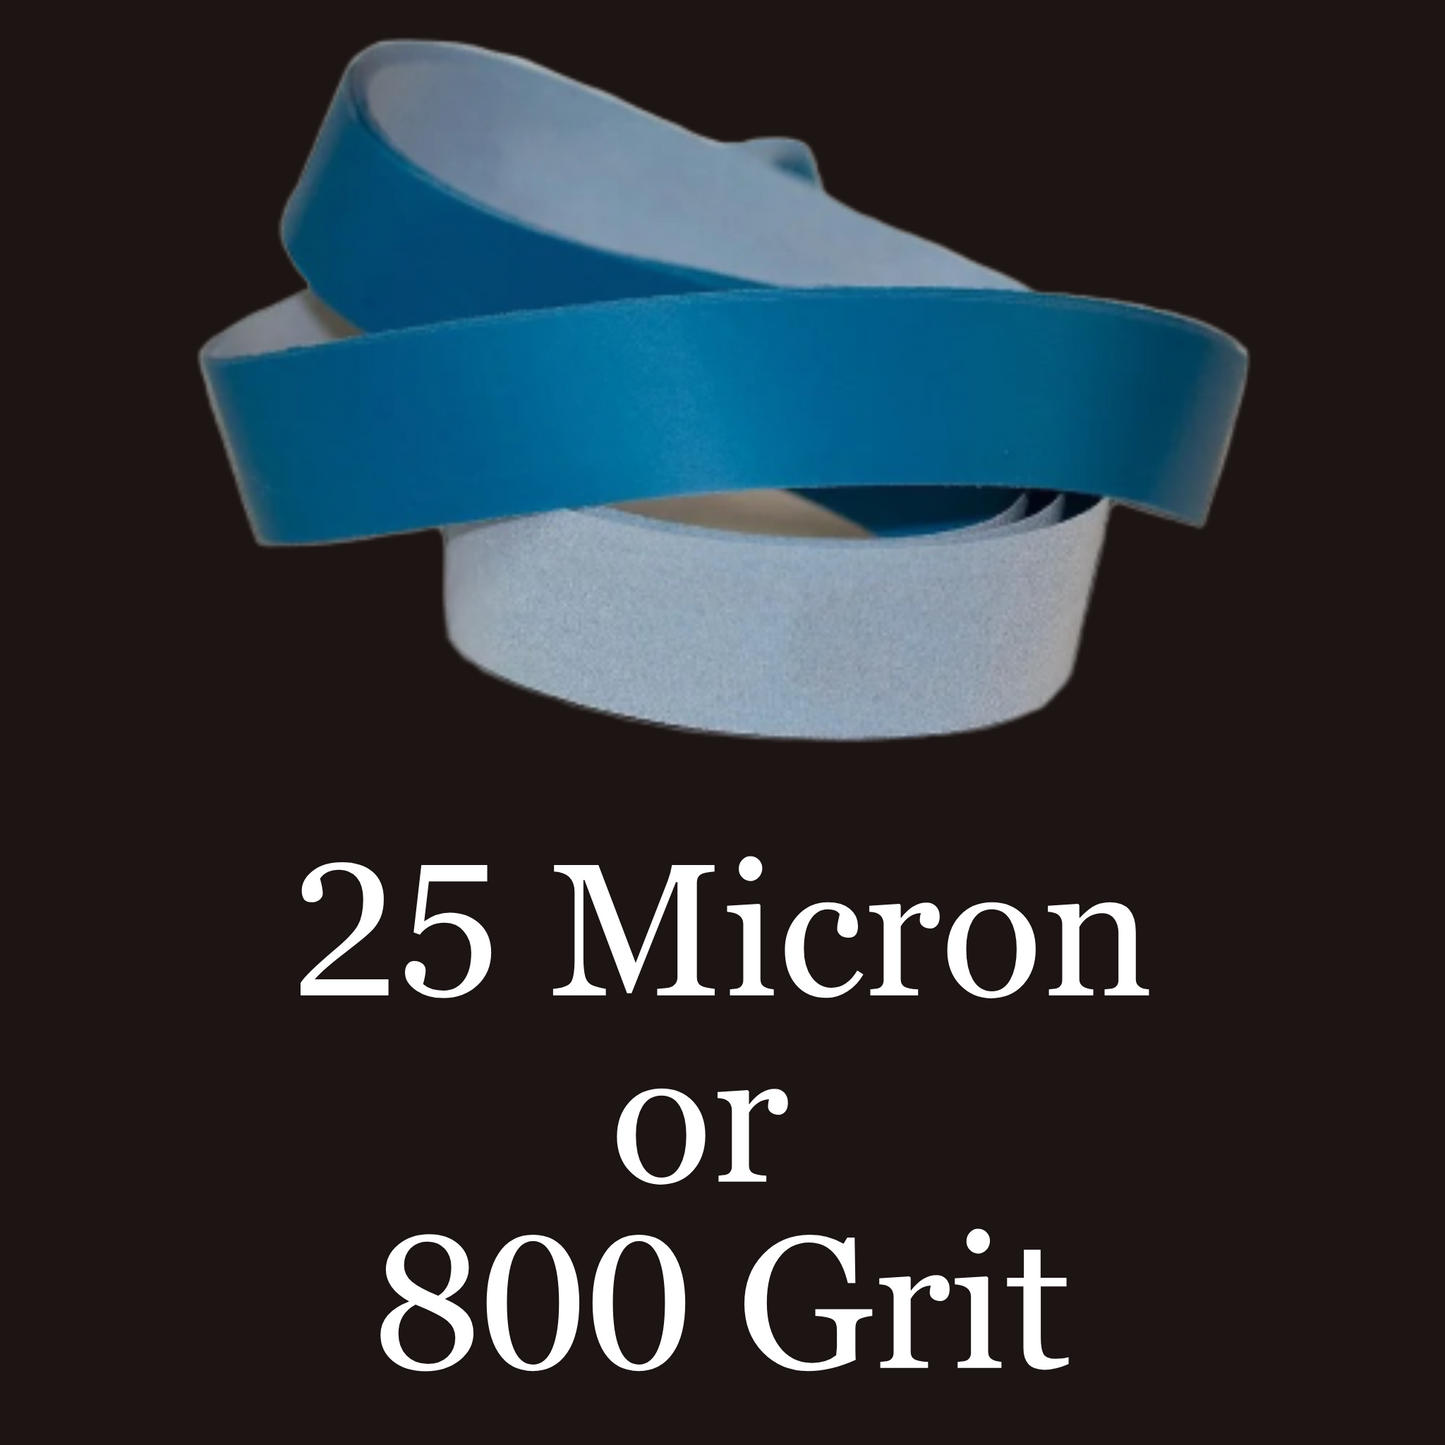 2” x 42” Film Micron Graded Finishing Belts 25 Micron or 800 Grit